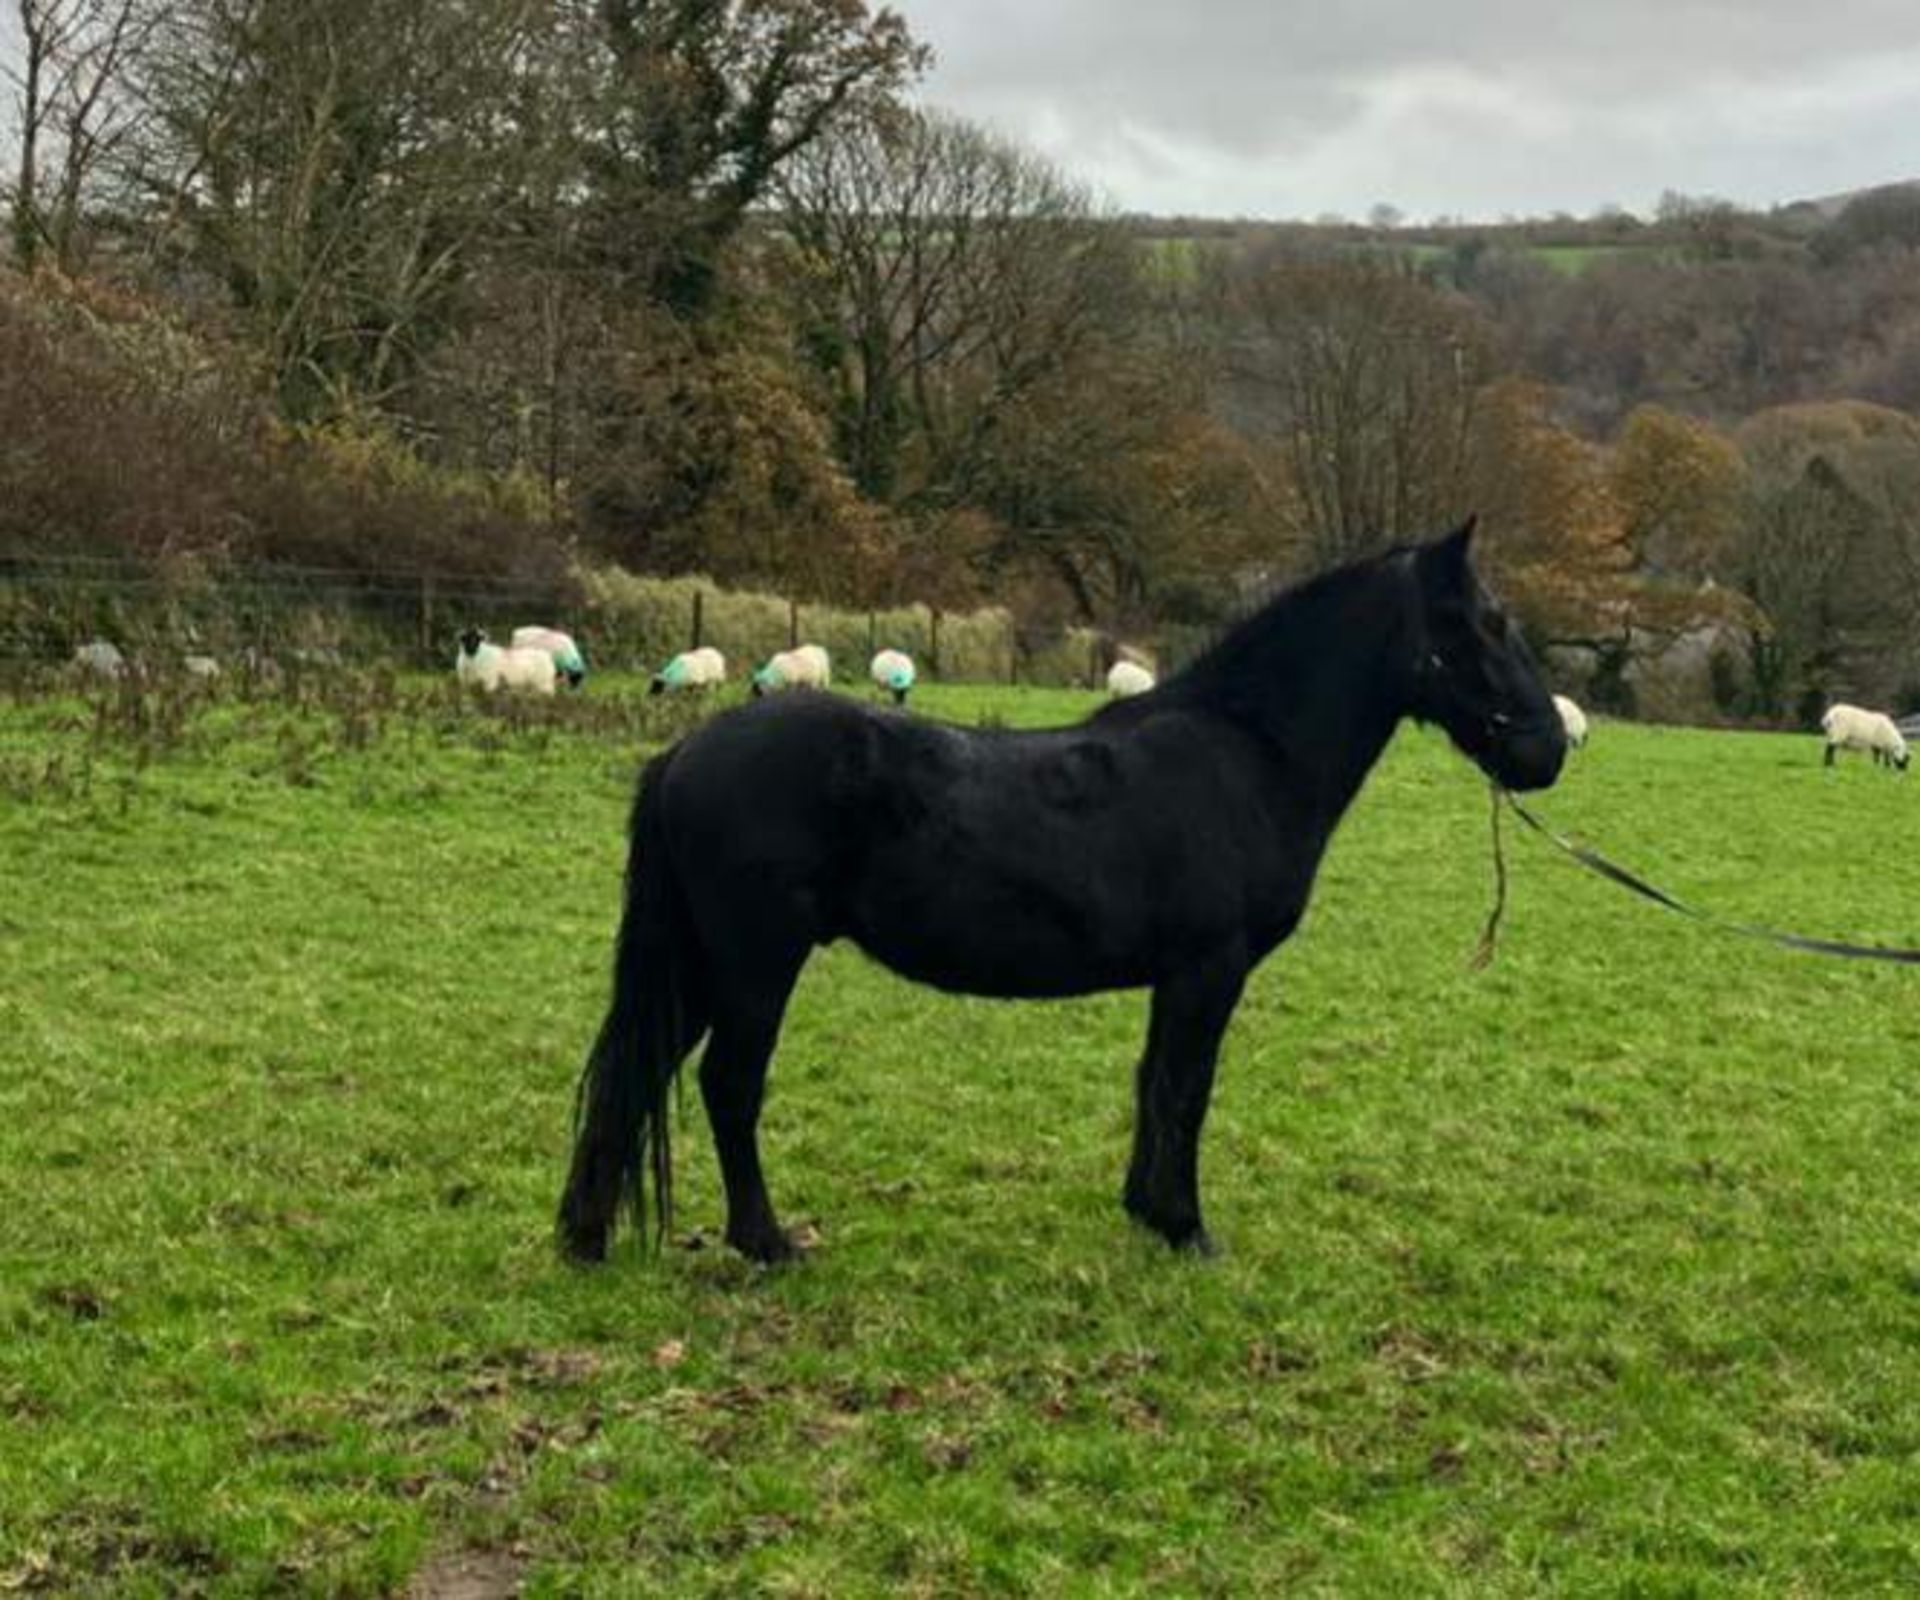 'THUNDER DASH' DARTMOOR HILL PONY BLACK GELDING APPROX 2 YEARS OLD - Image 10 of 10